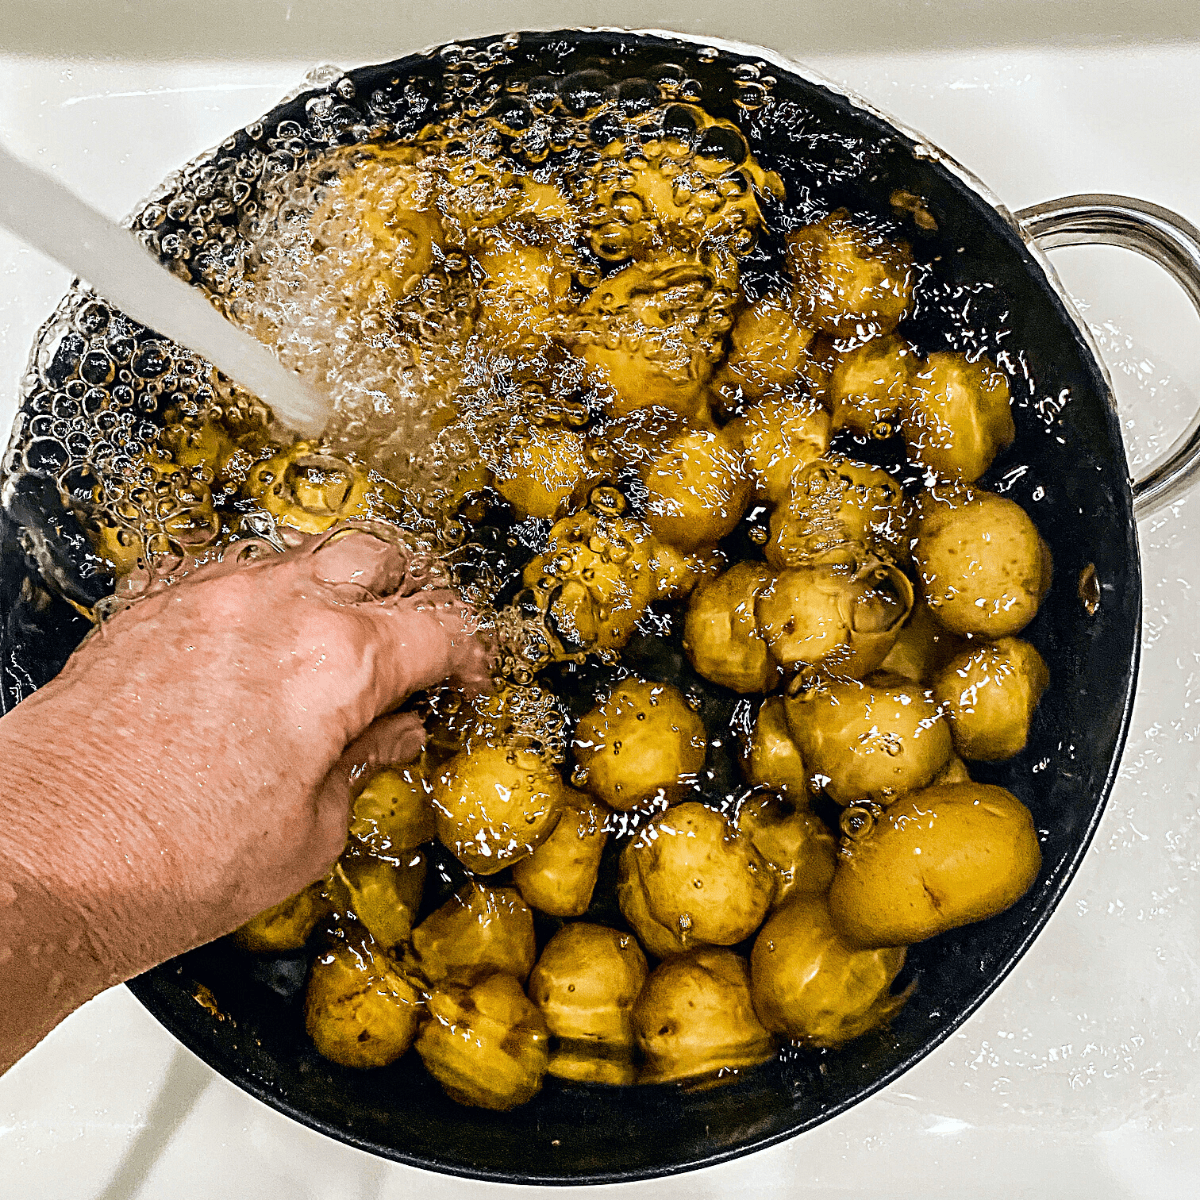 Potatoes are in a large pot with water filling the pot and cooling the potatoes.